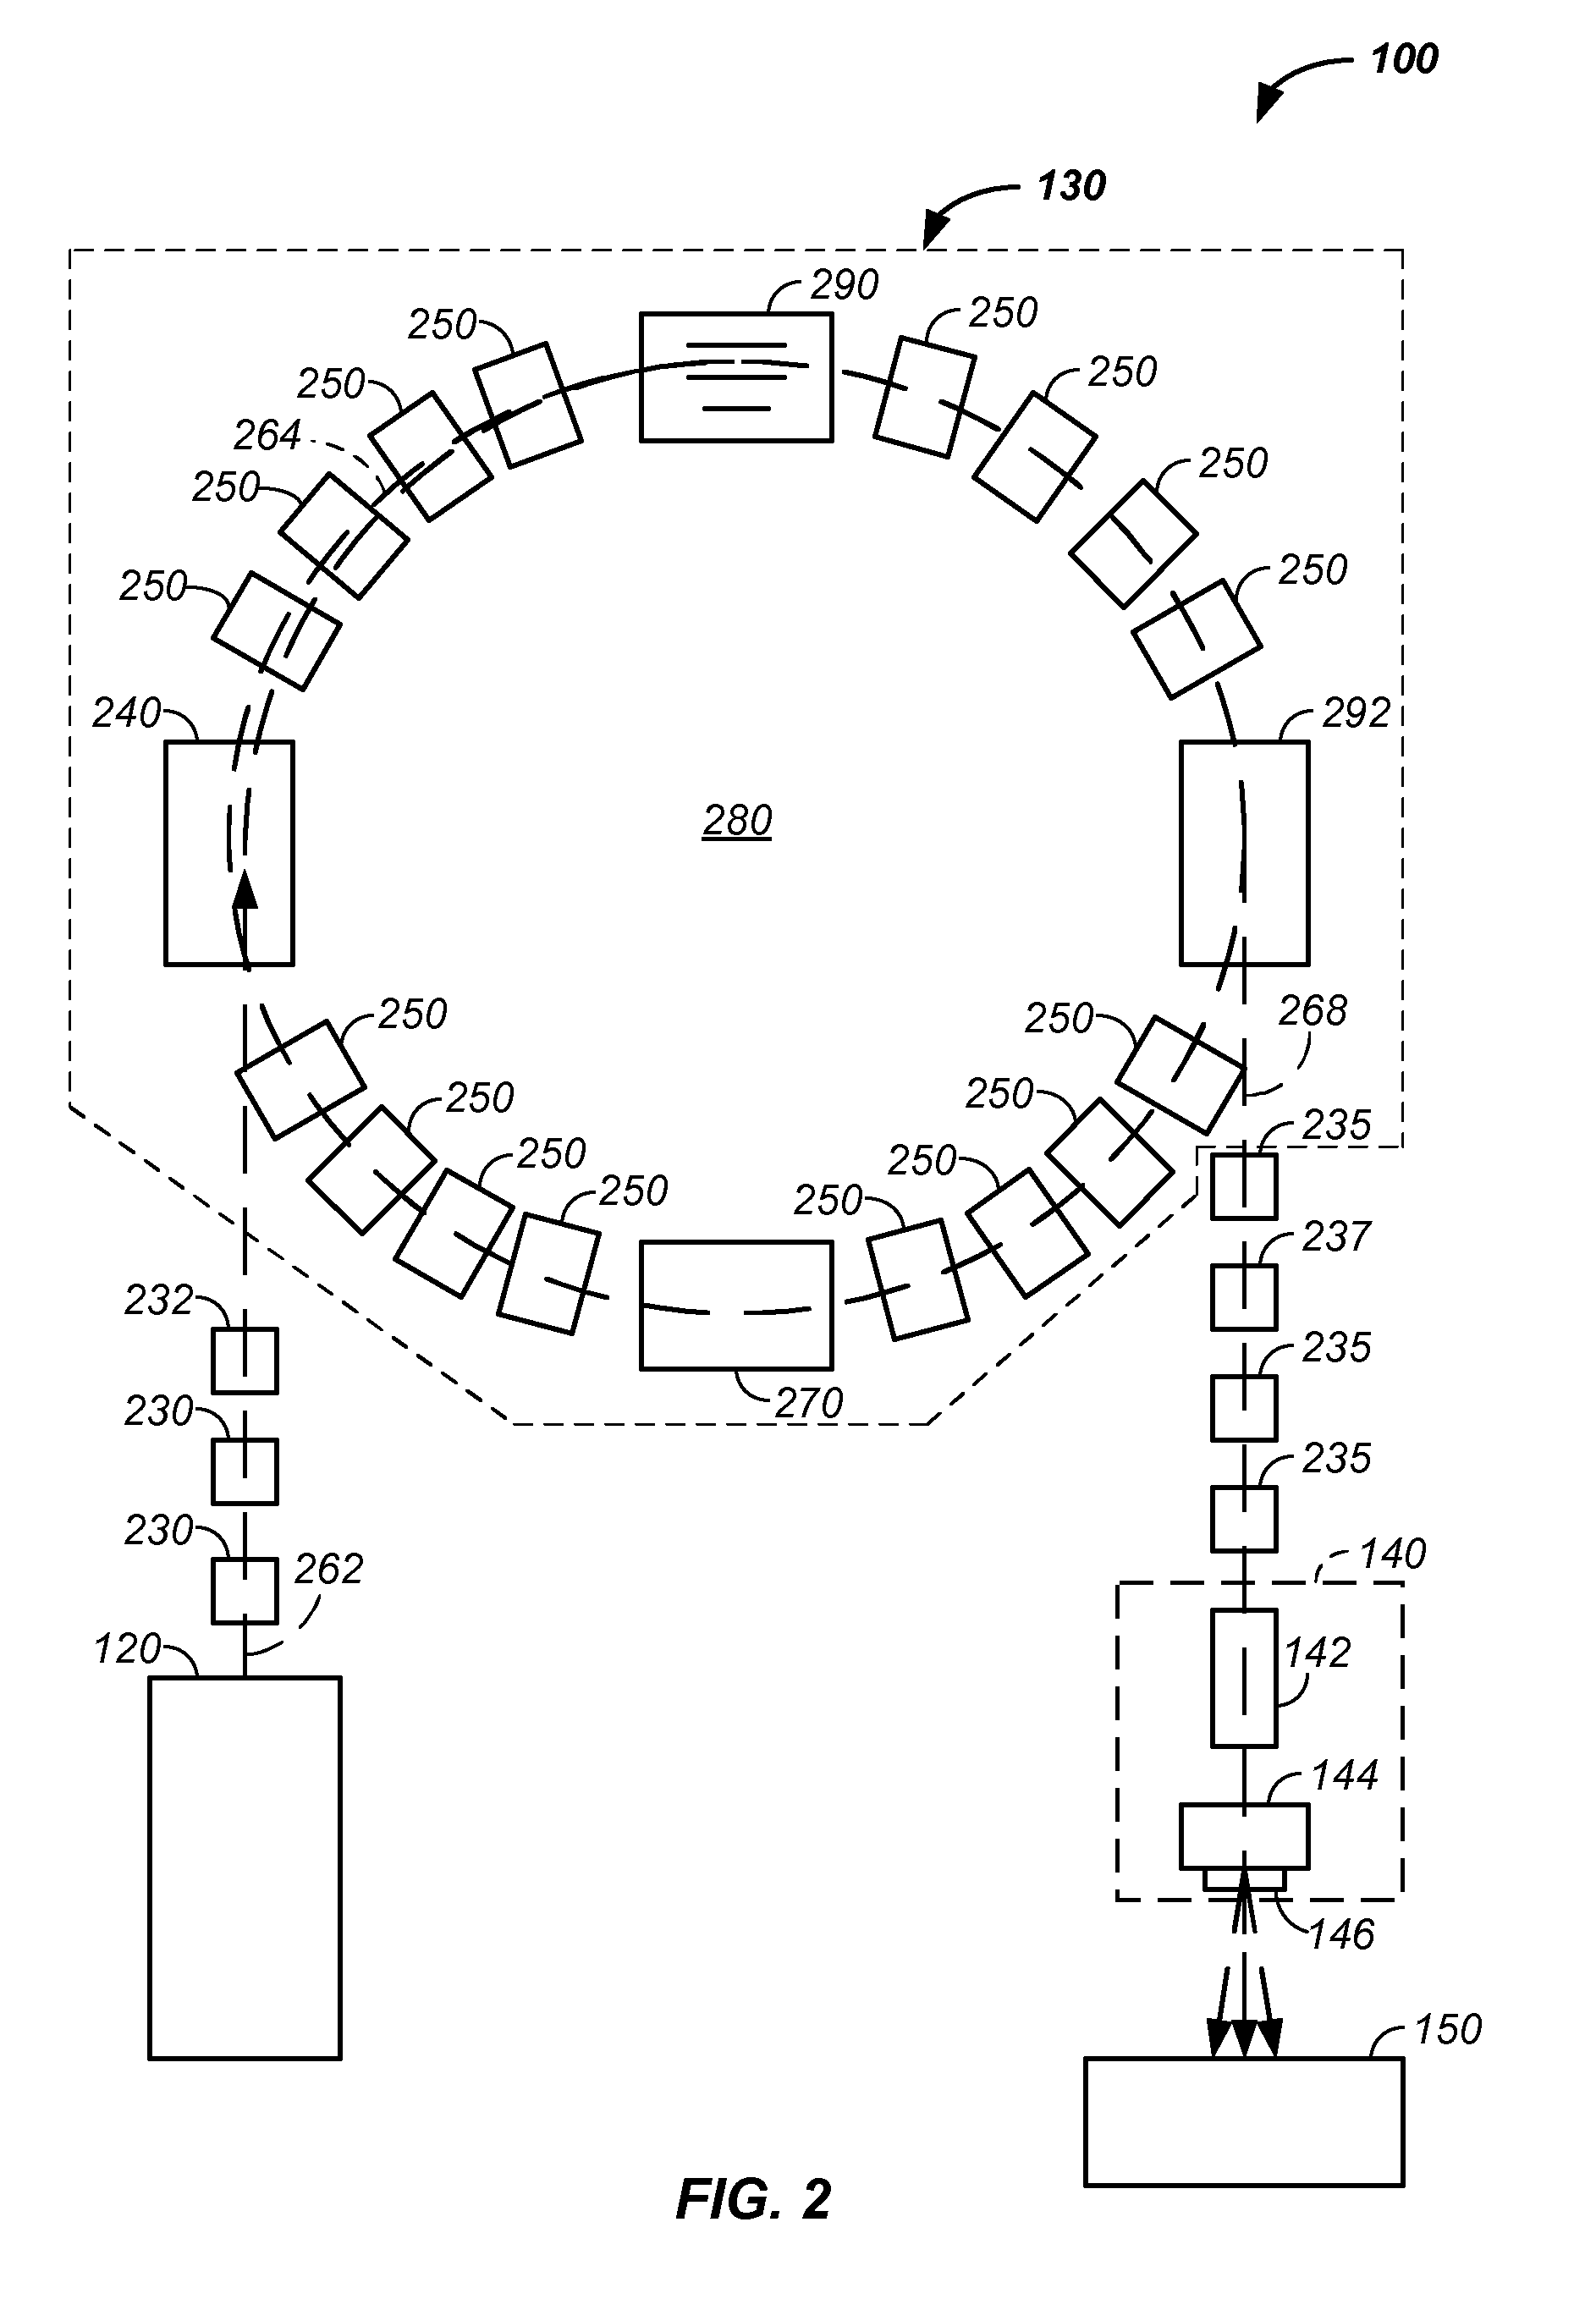 Multi-axis charged particle cancer therapy method and apparatus